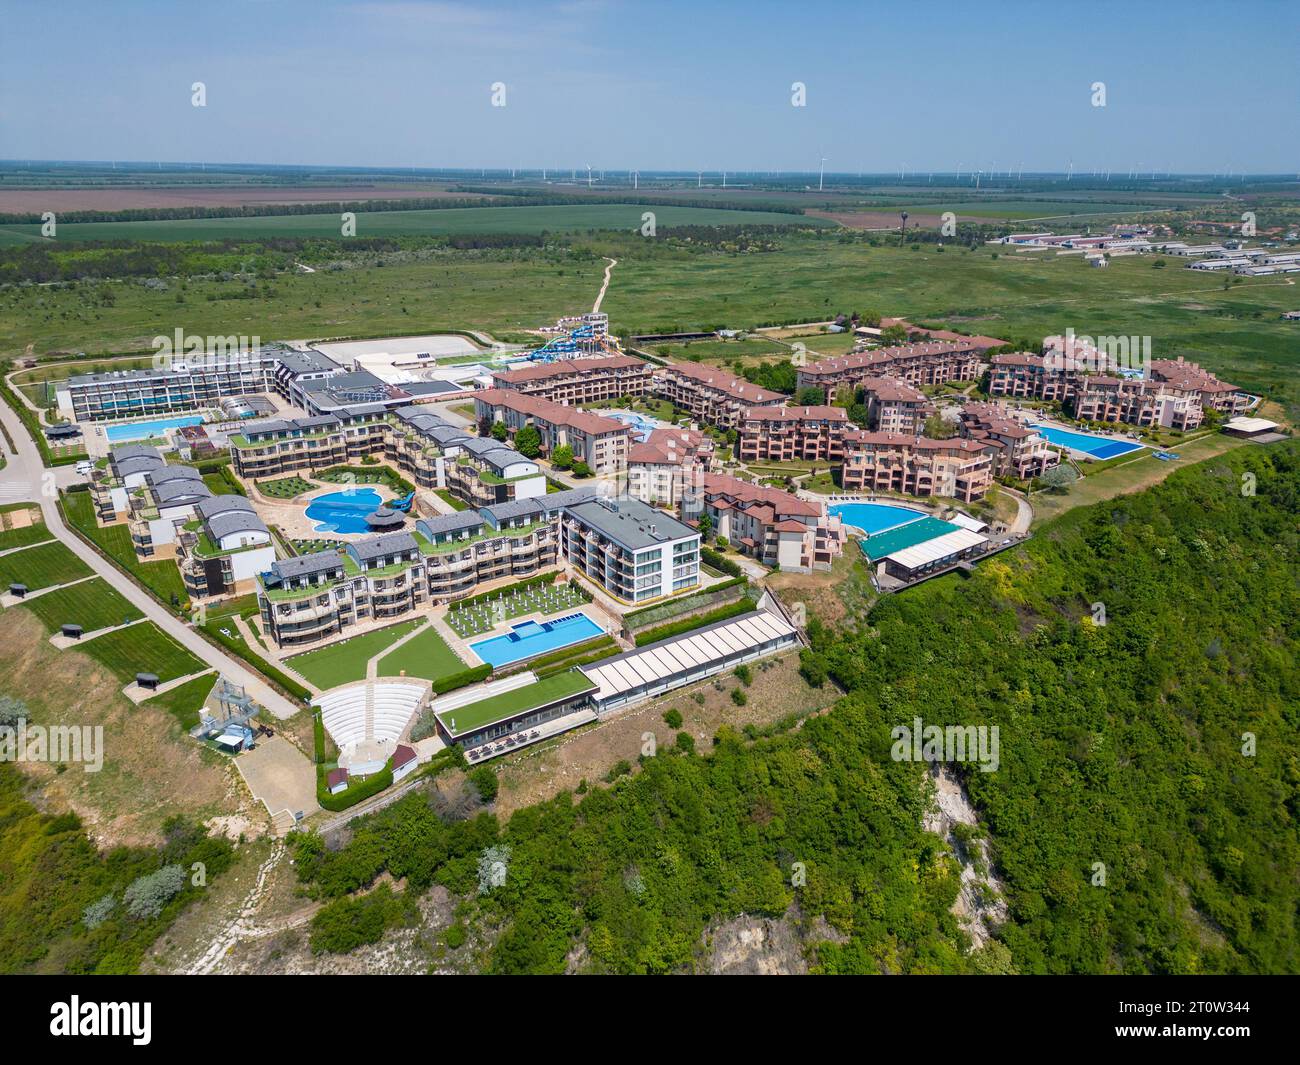 The massive modern hotel complex sprawled beneath, boasting a myriad of swimming pools, sports fields, and recreation areas. From above, the vibrant o Stock Photo